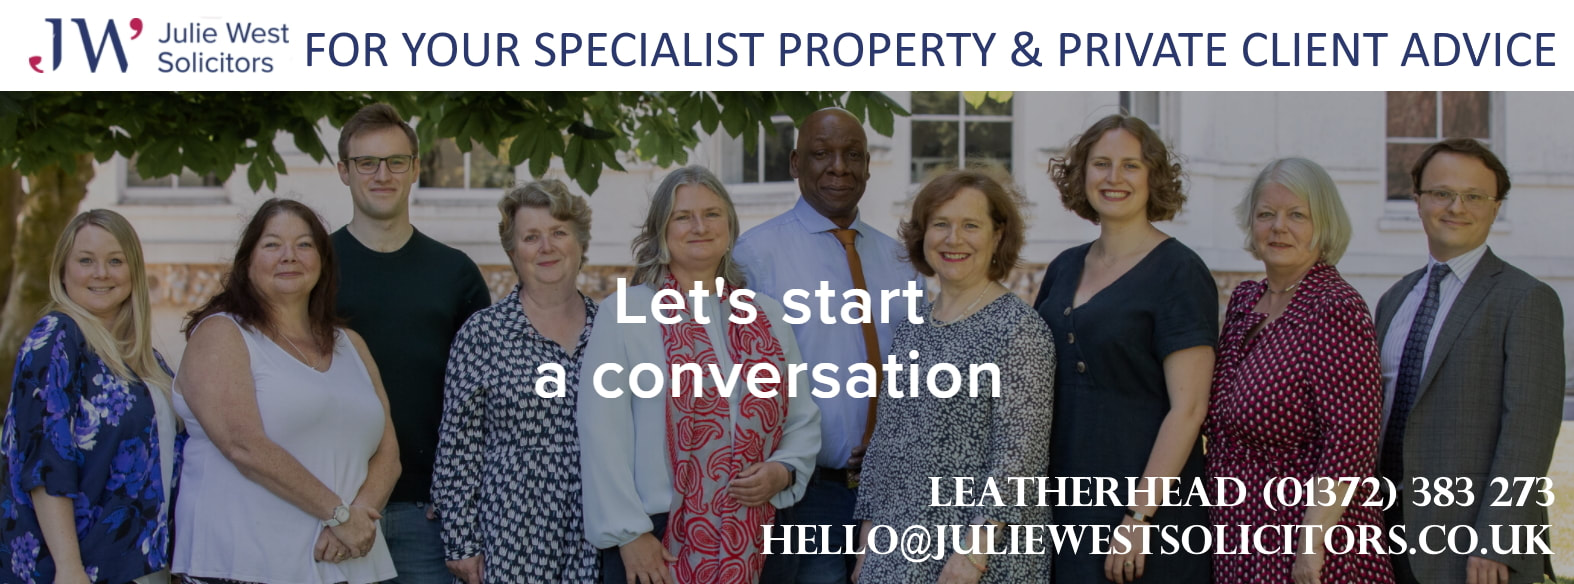 Julie Wesy Solicitors for your specialist property & private client advice - 01372 383 273 Leatherhead